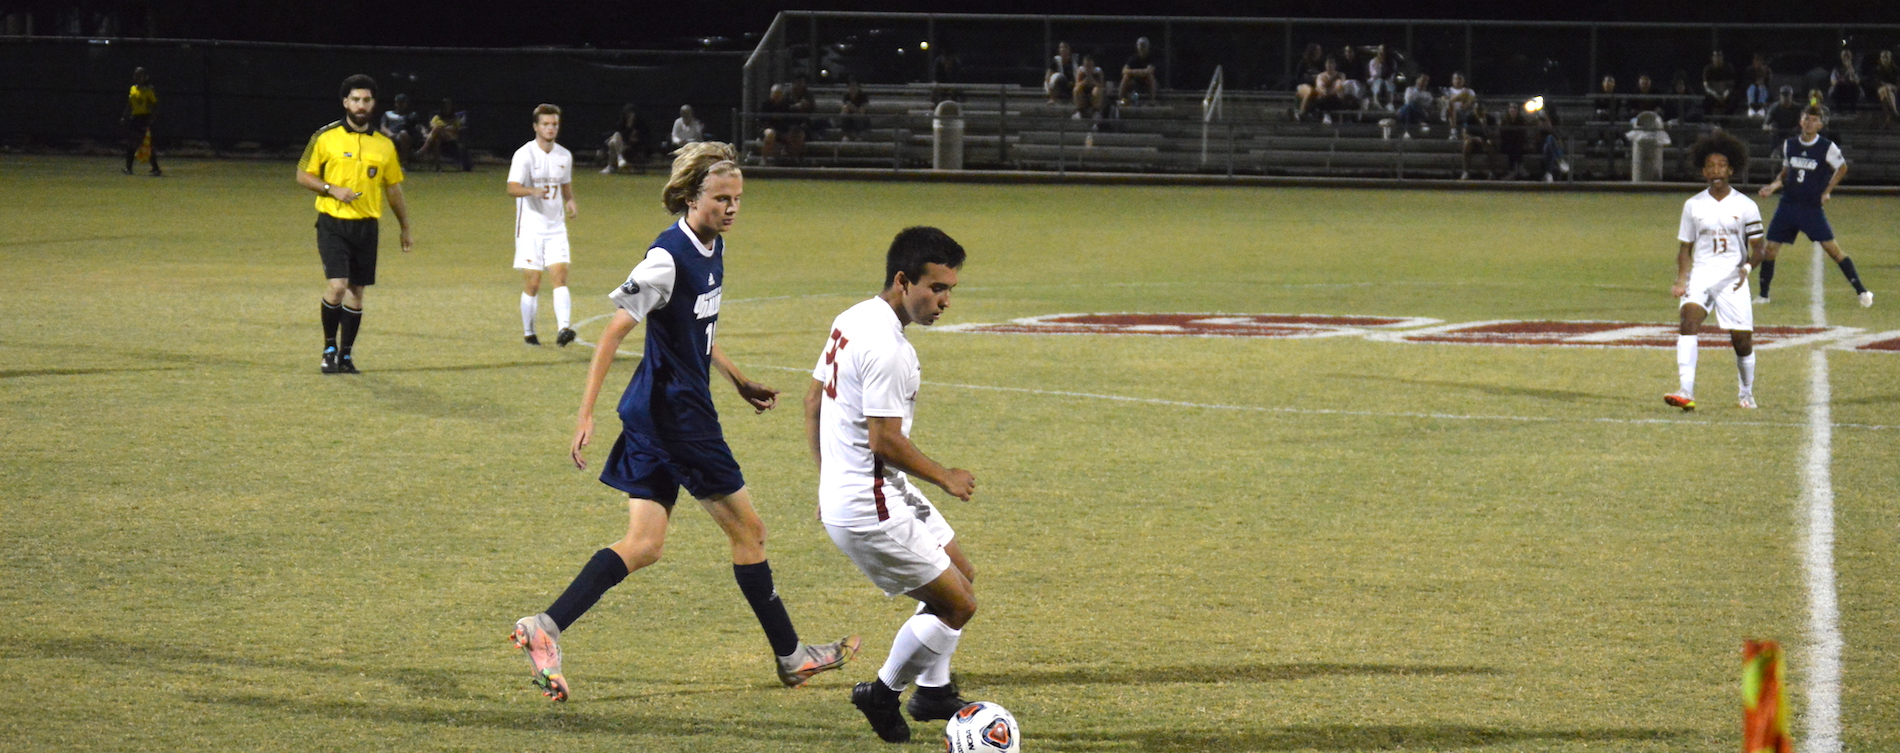 'Roos Drop Road Match at Southwestern